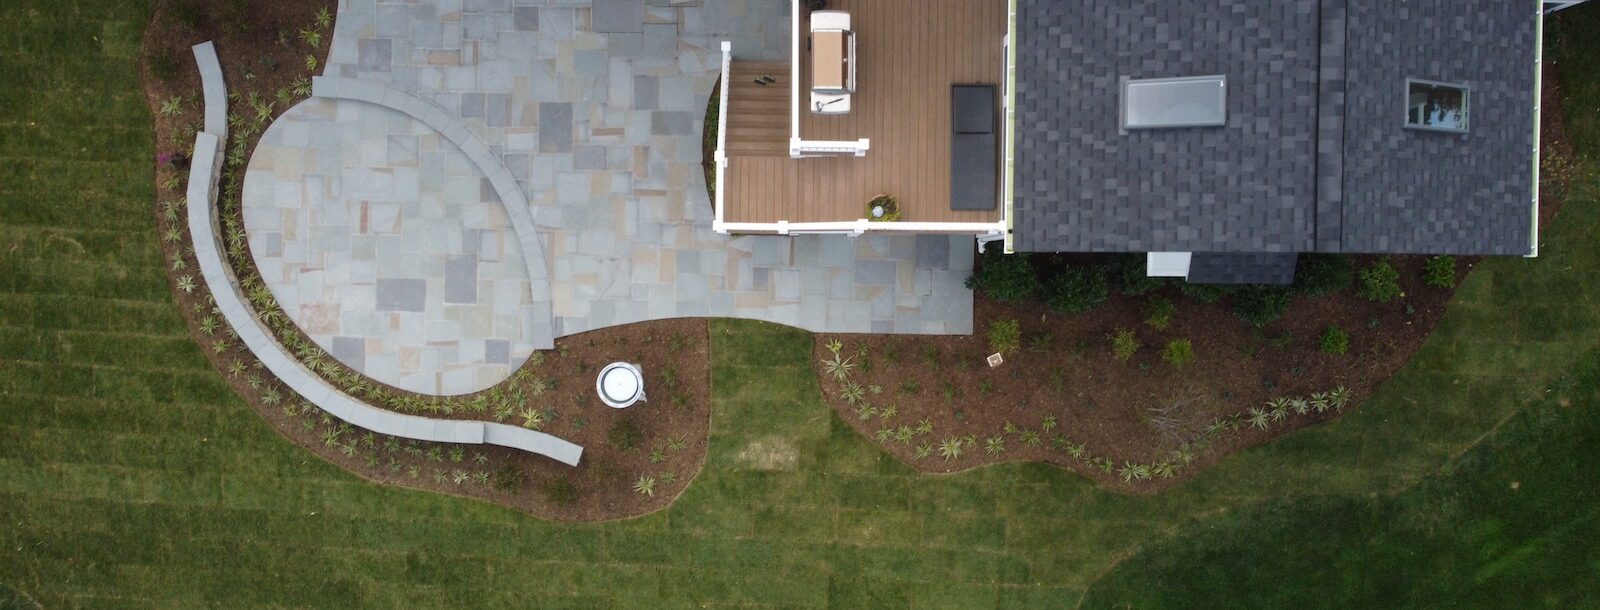 Clarksville, MD Landscaping Services